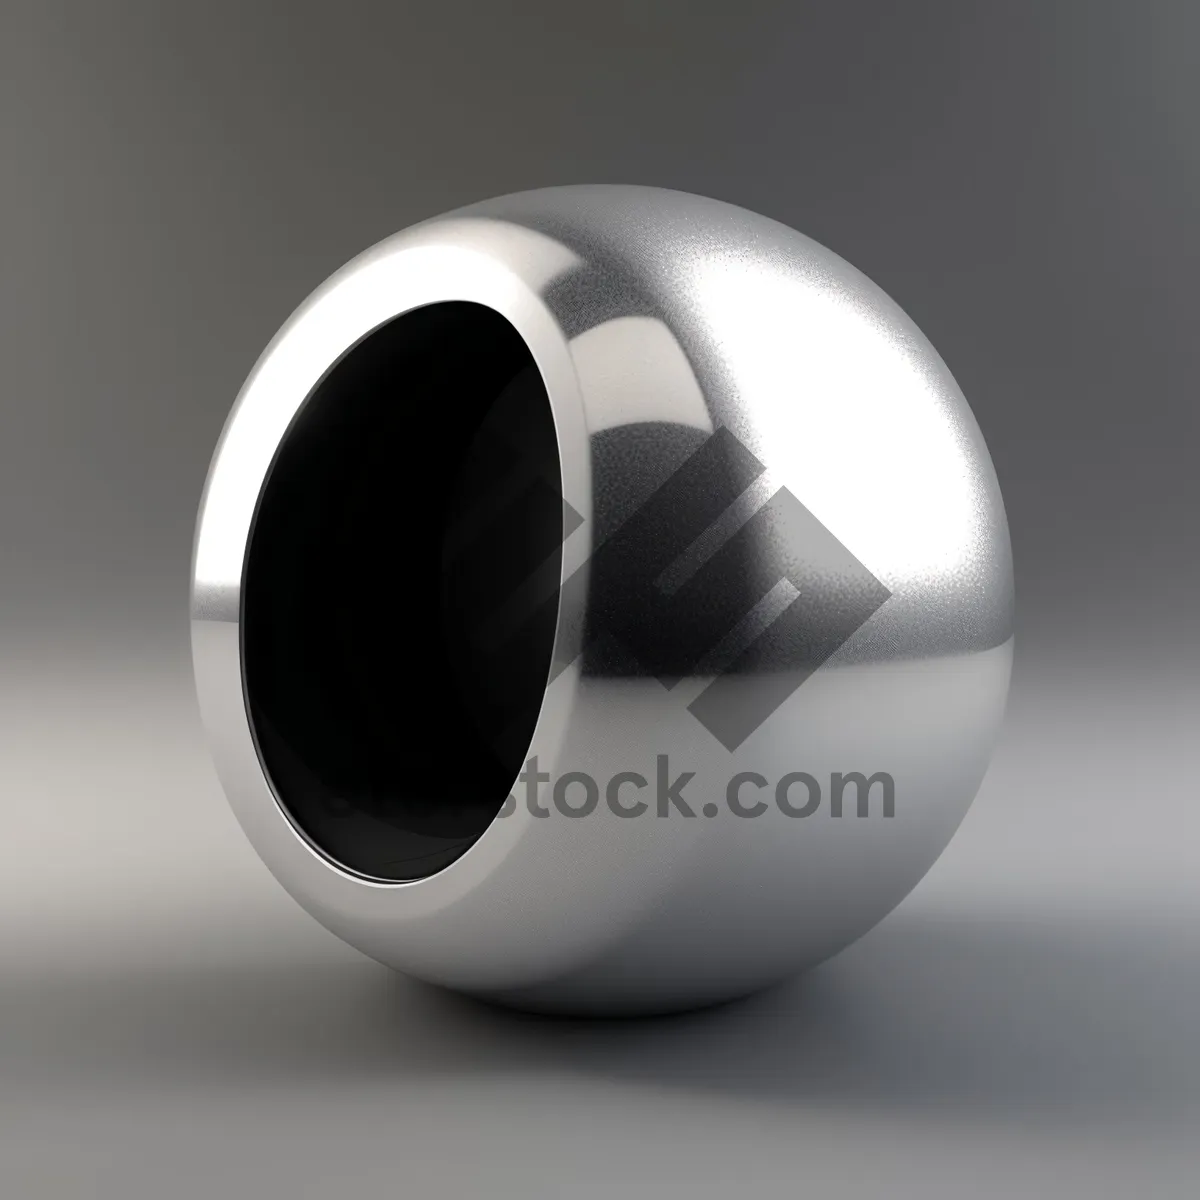 Picture of Black Shiny 3D Cup Design with Glass Sphere